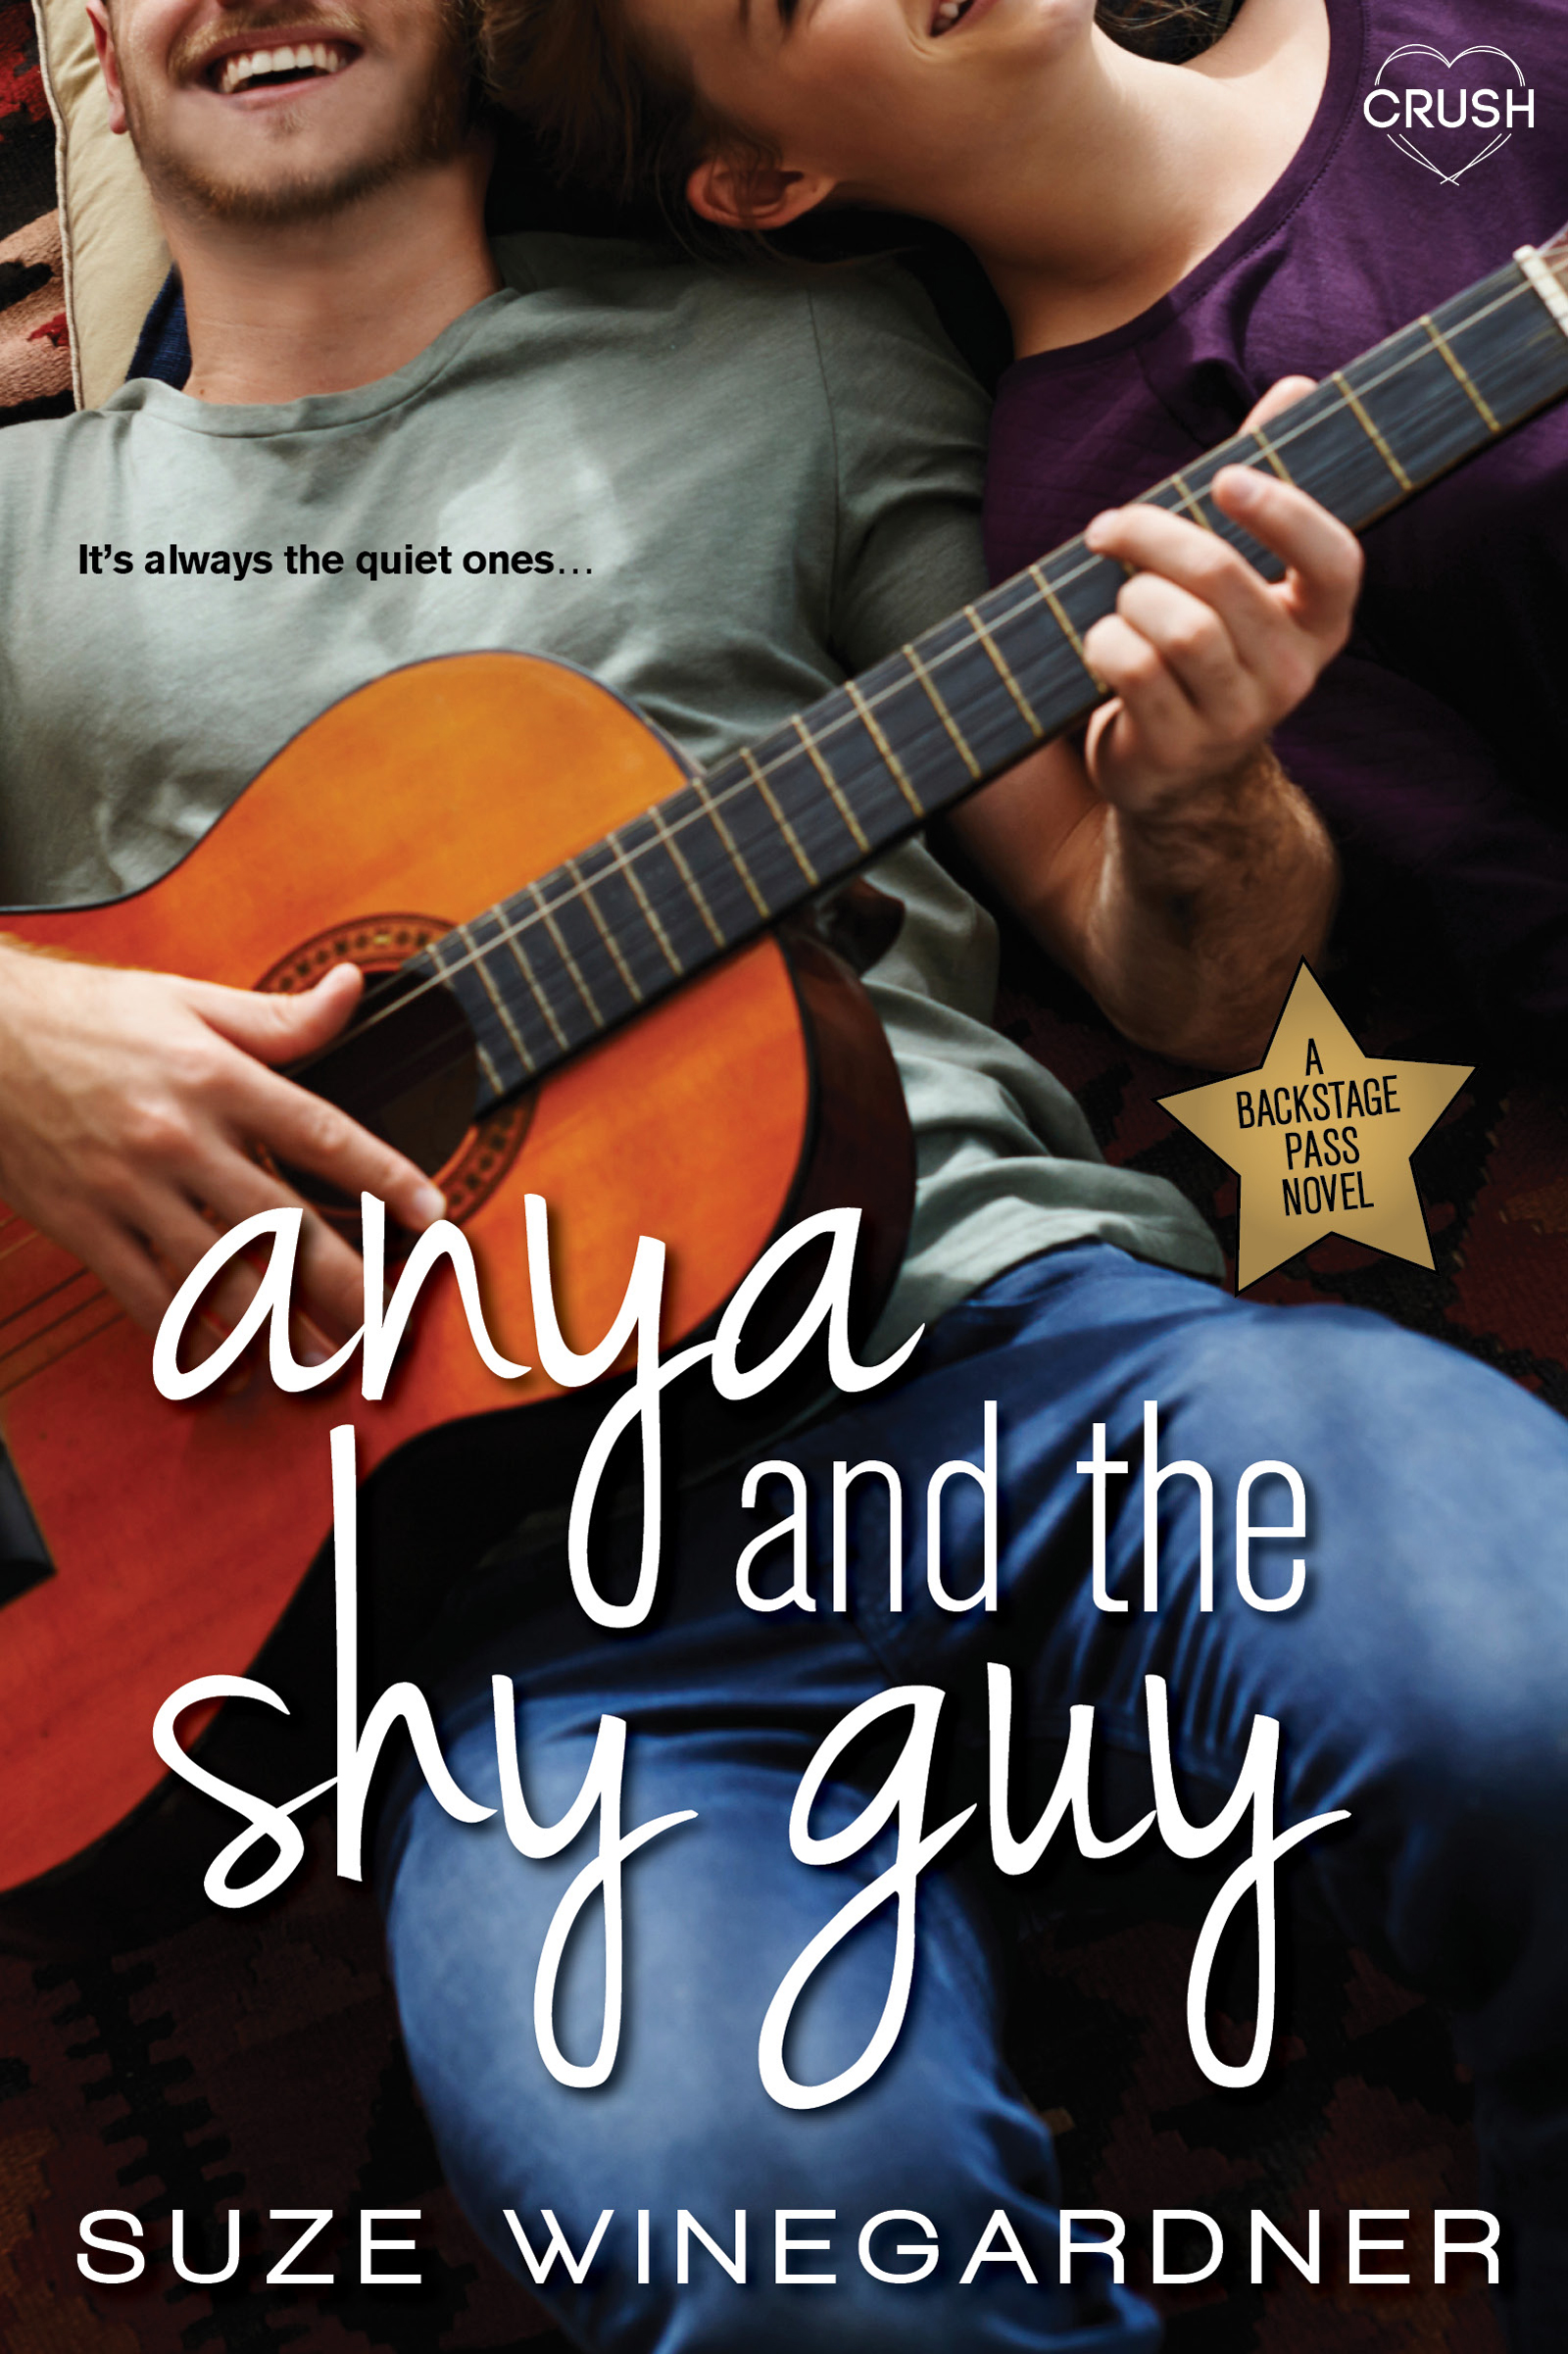 Anya and the Shy Guy by Suze Winegardner